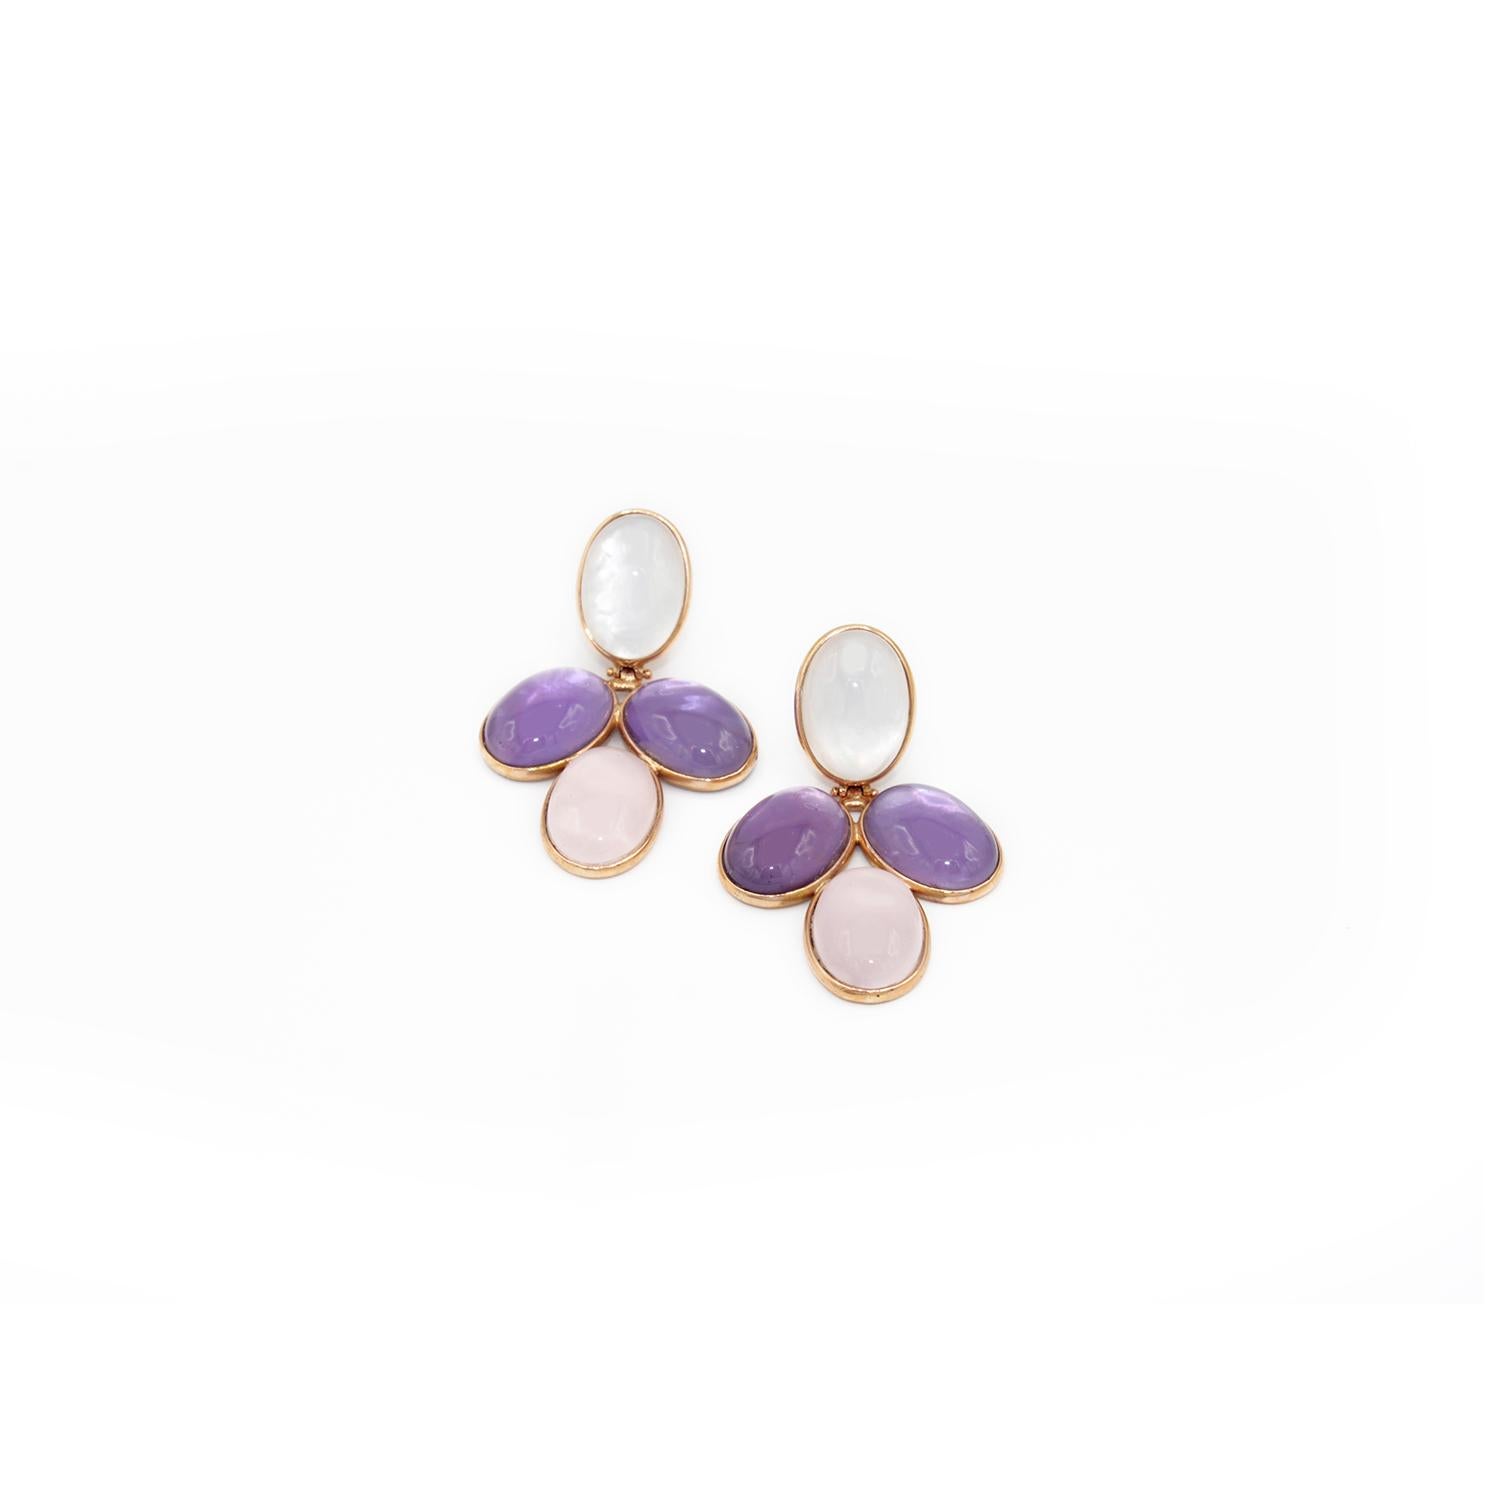 Fashion earrings in 18kt pink gold and amethyst, pink quartz and ialino quartz cabochons. 
Pierce and clip system. 
n. 8 small amethyst, pink quartz and ialino quartz cabochons ct. 47
Pink Gold g. 5.5


